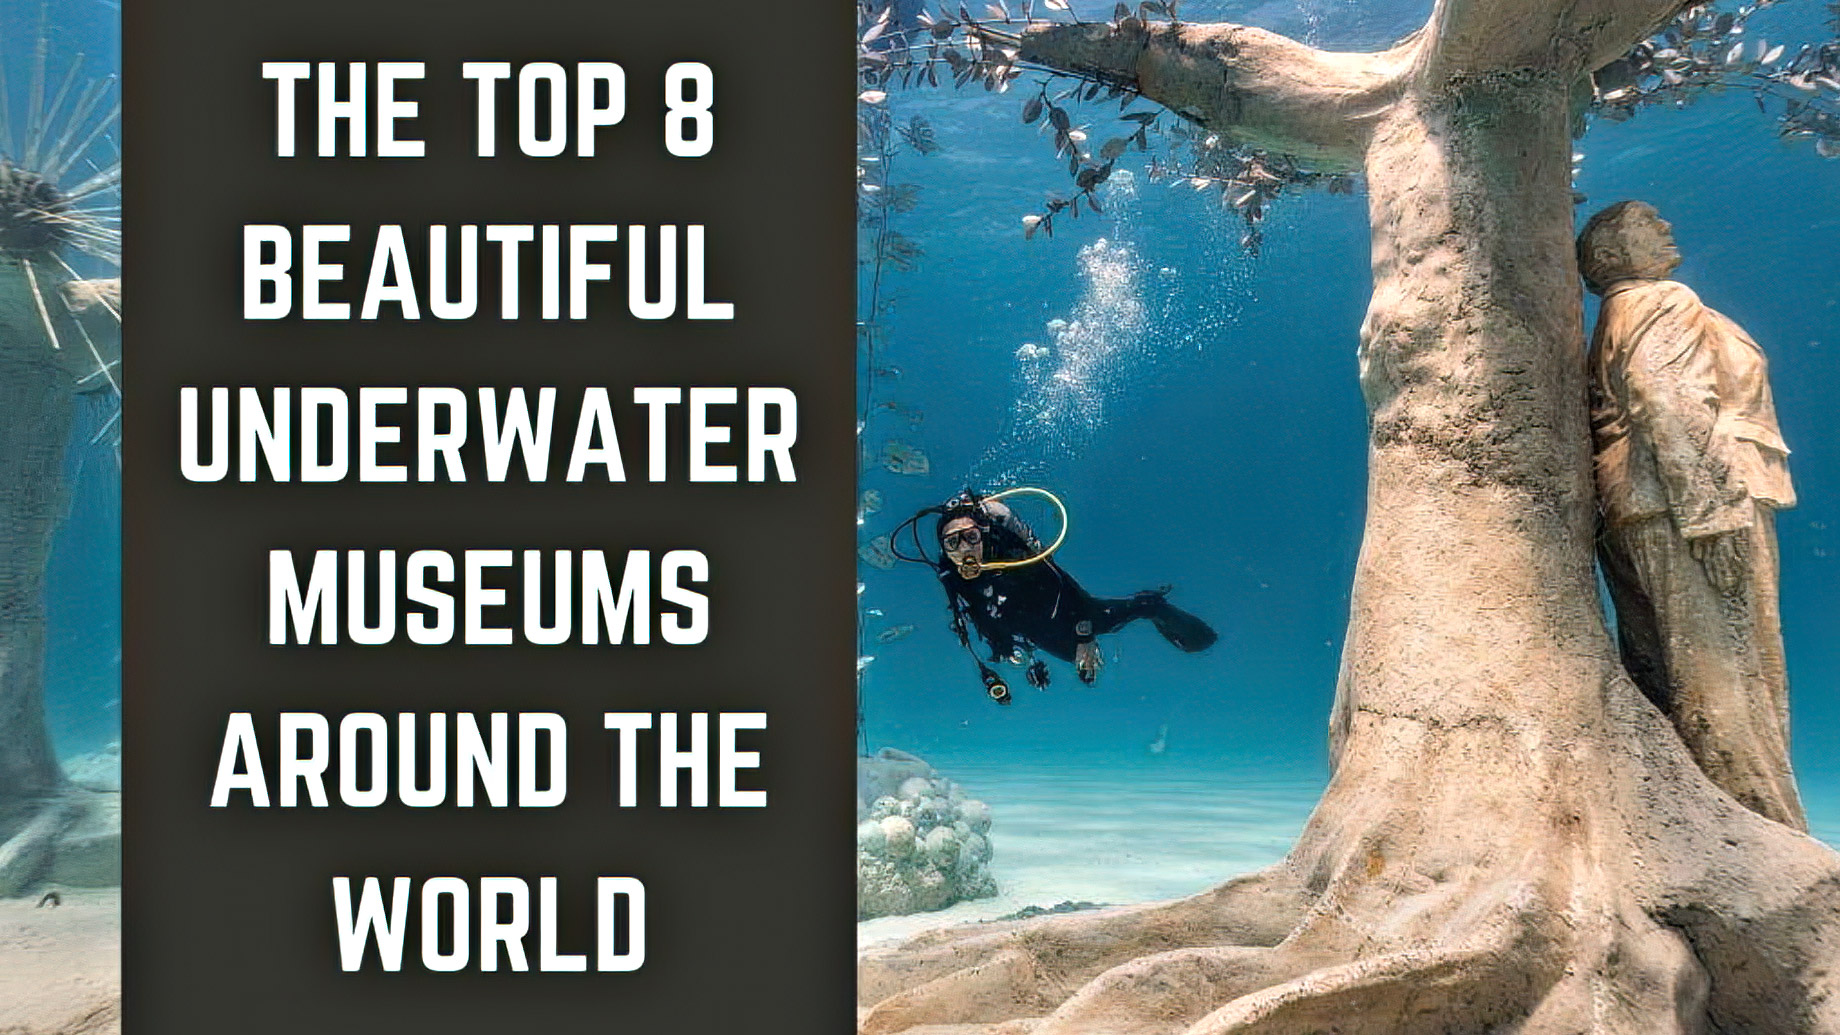 The Top 8 Beautiful Underwater Museums Around The World